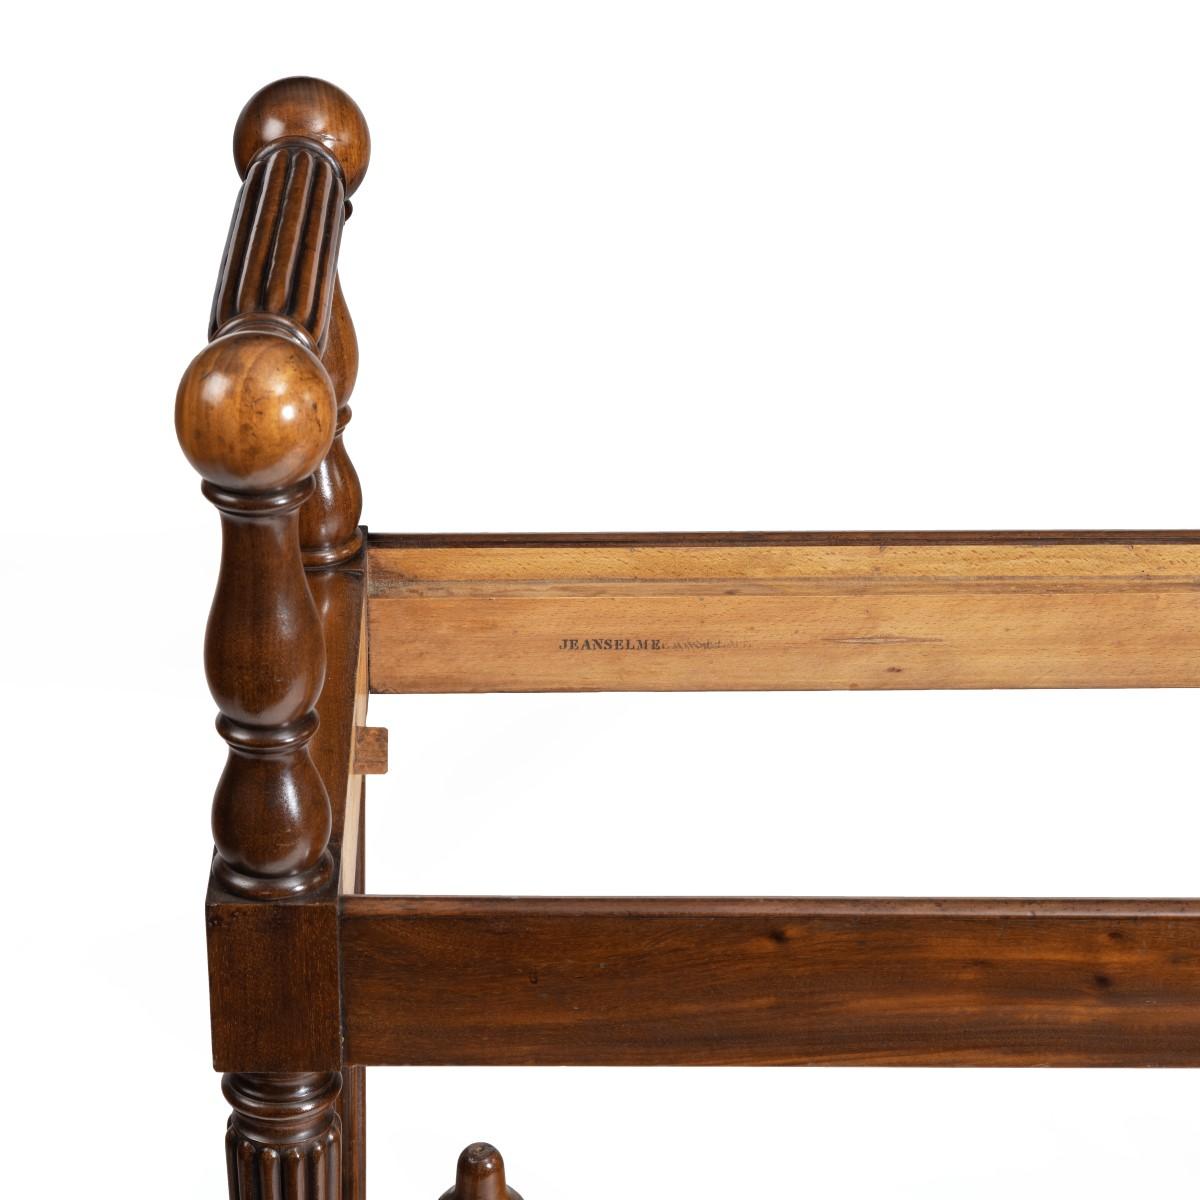 Louis Philippe mahogany hall bench with a folding foot-rest